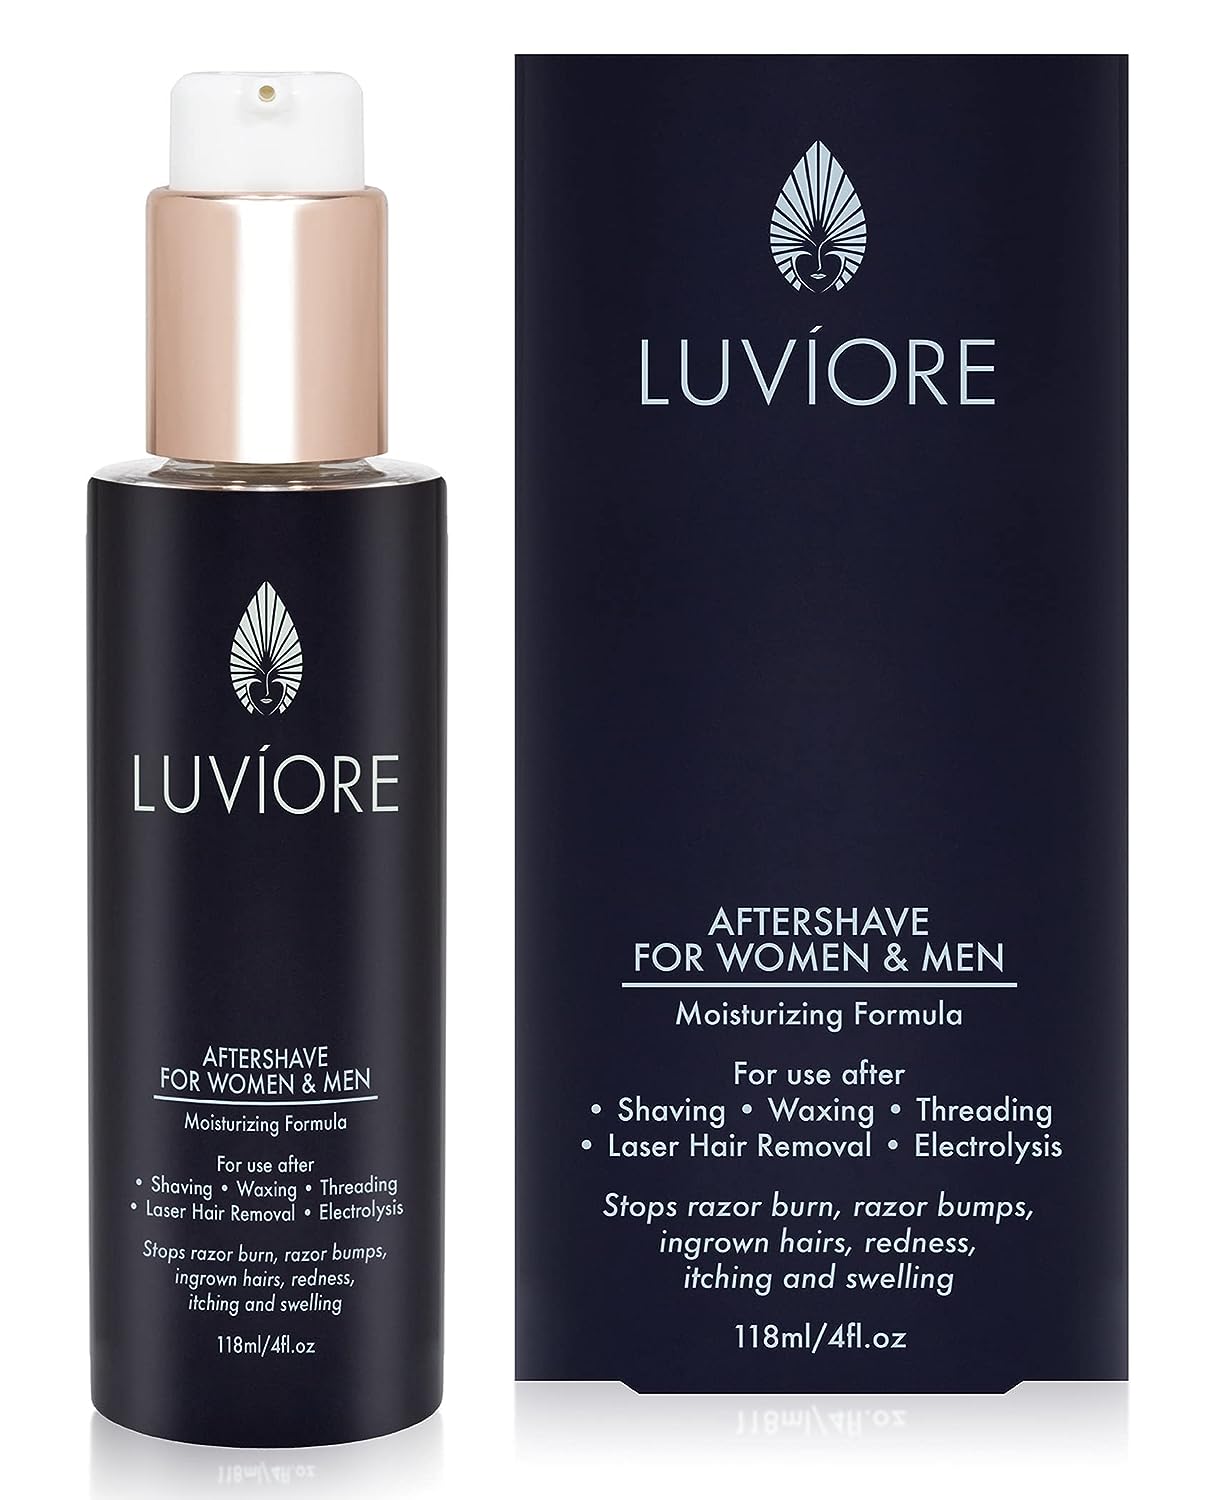 Luviore Ingrown Hair Treatment Solution (4 oz) - After [...]